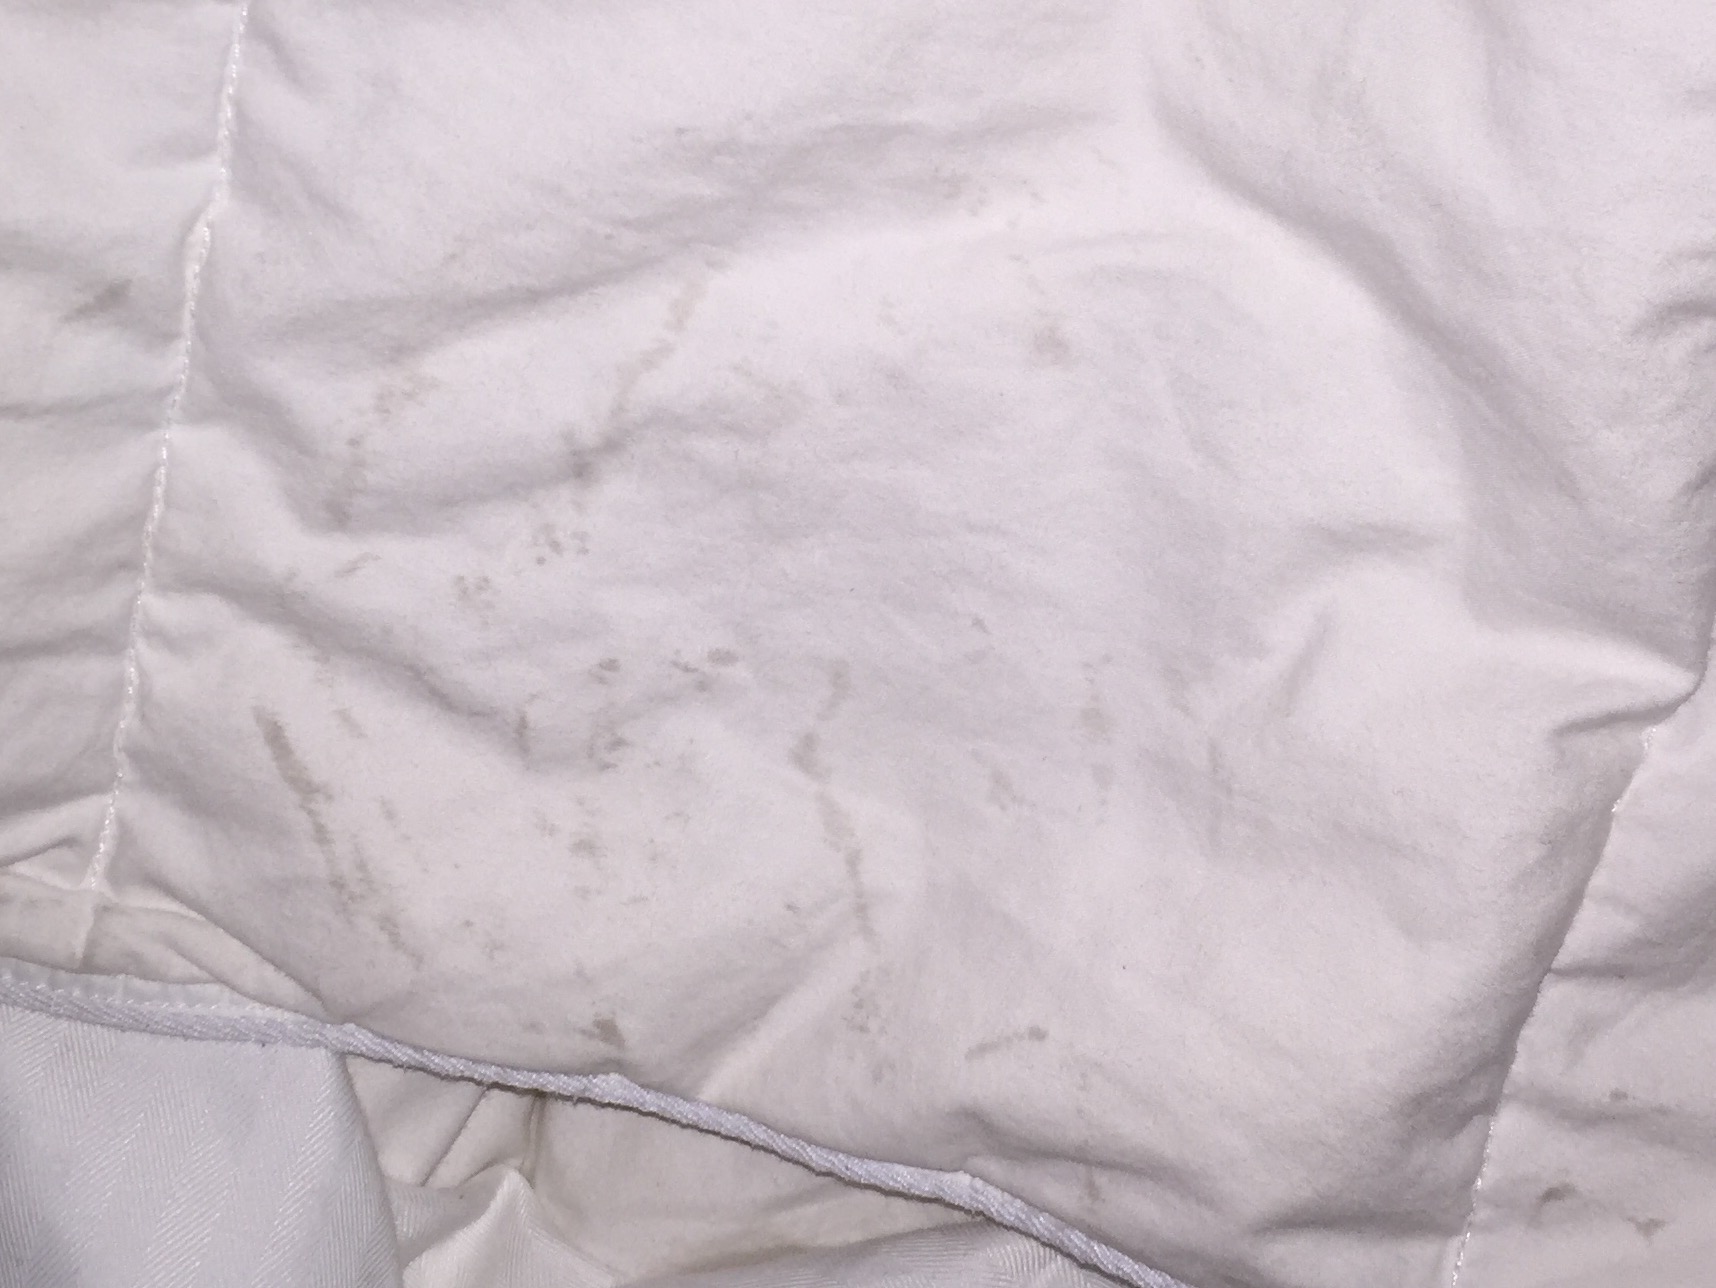 Stained blanket. Mold in shower, etc